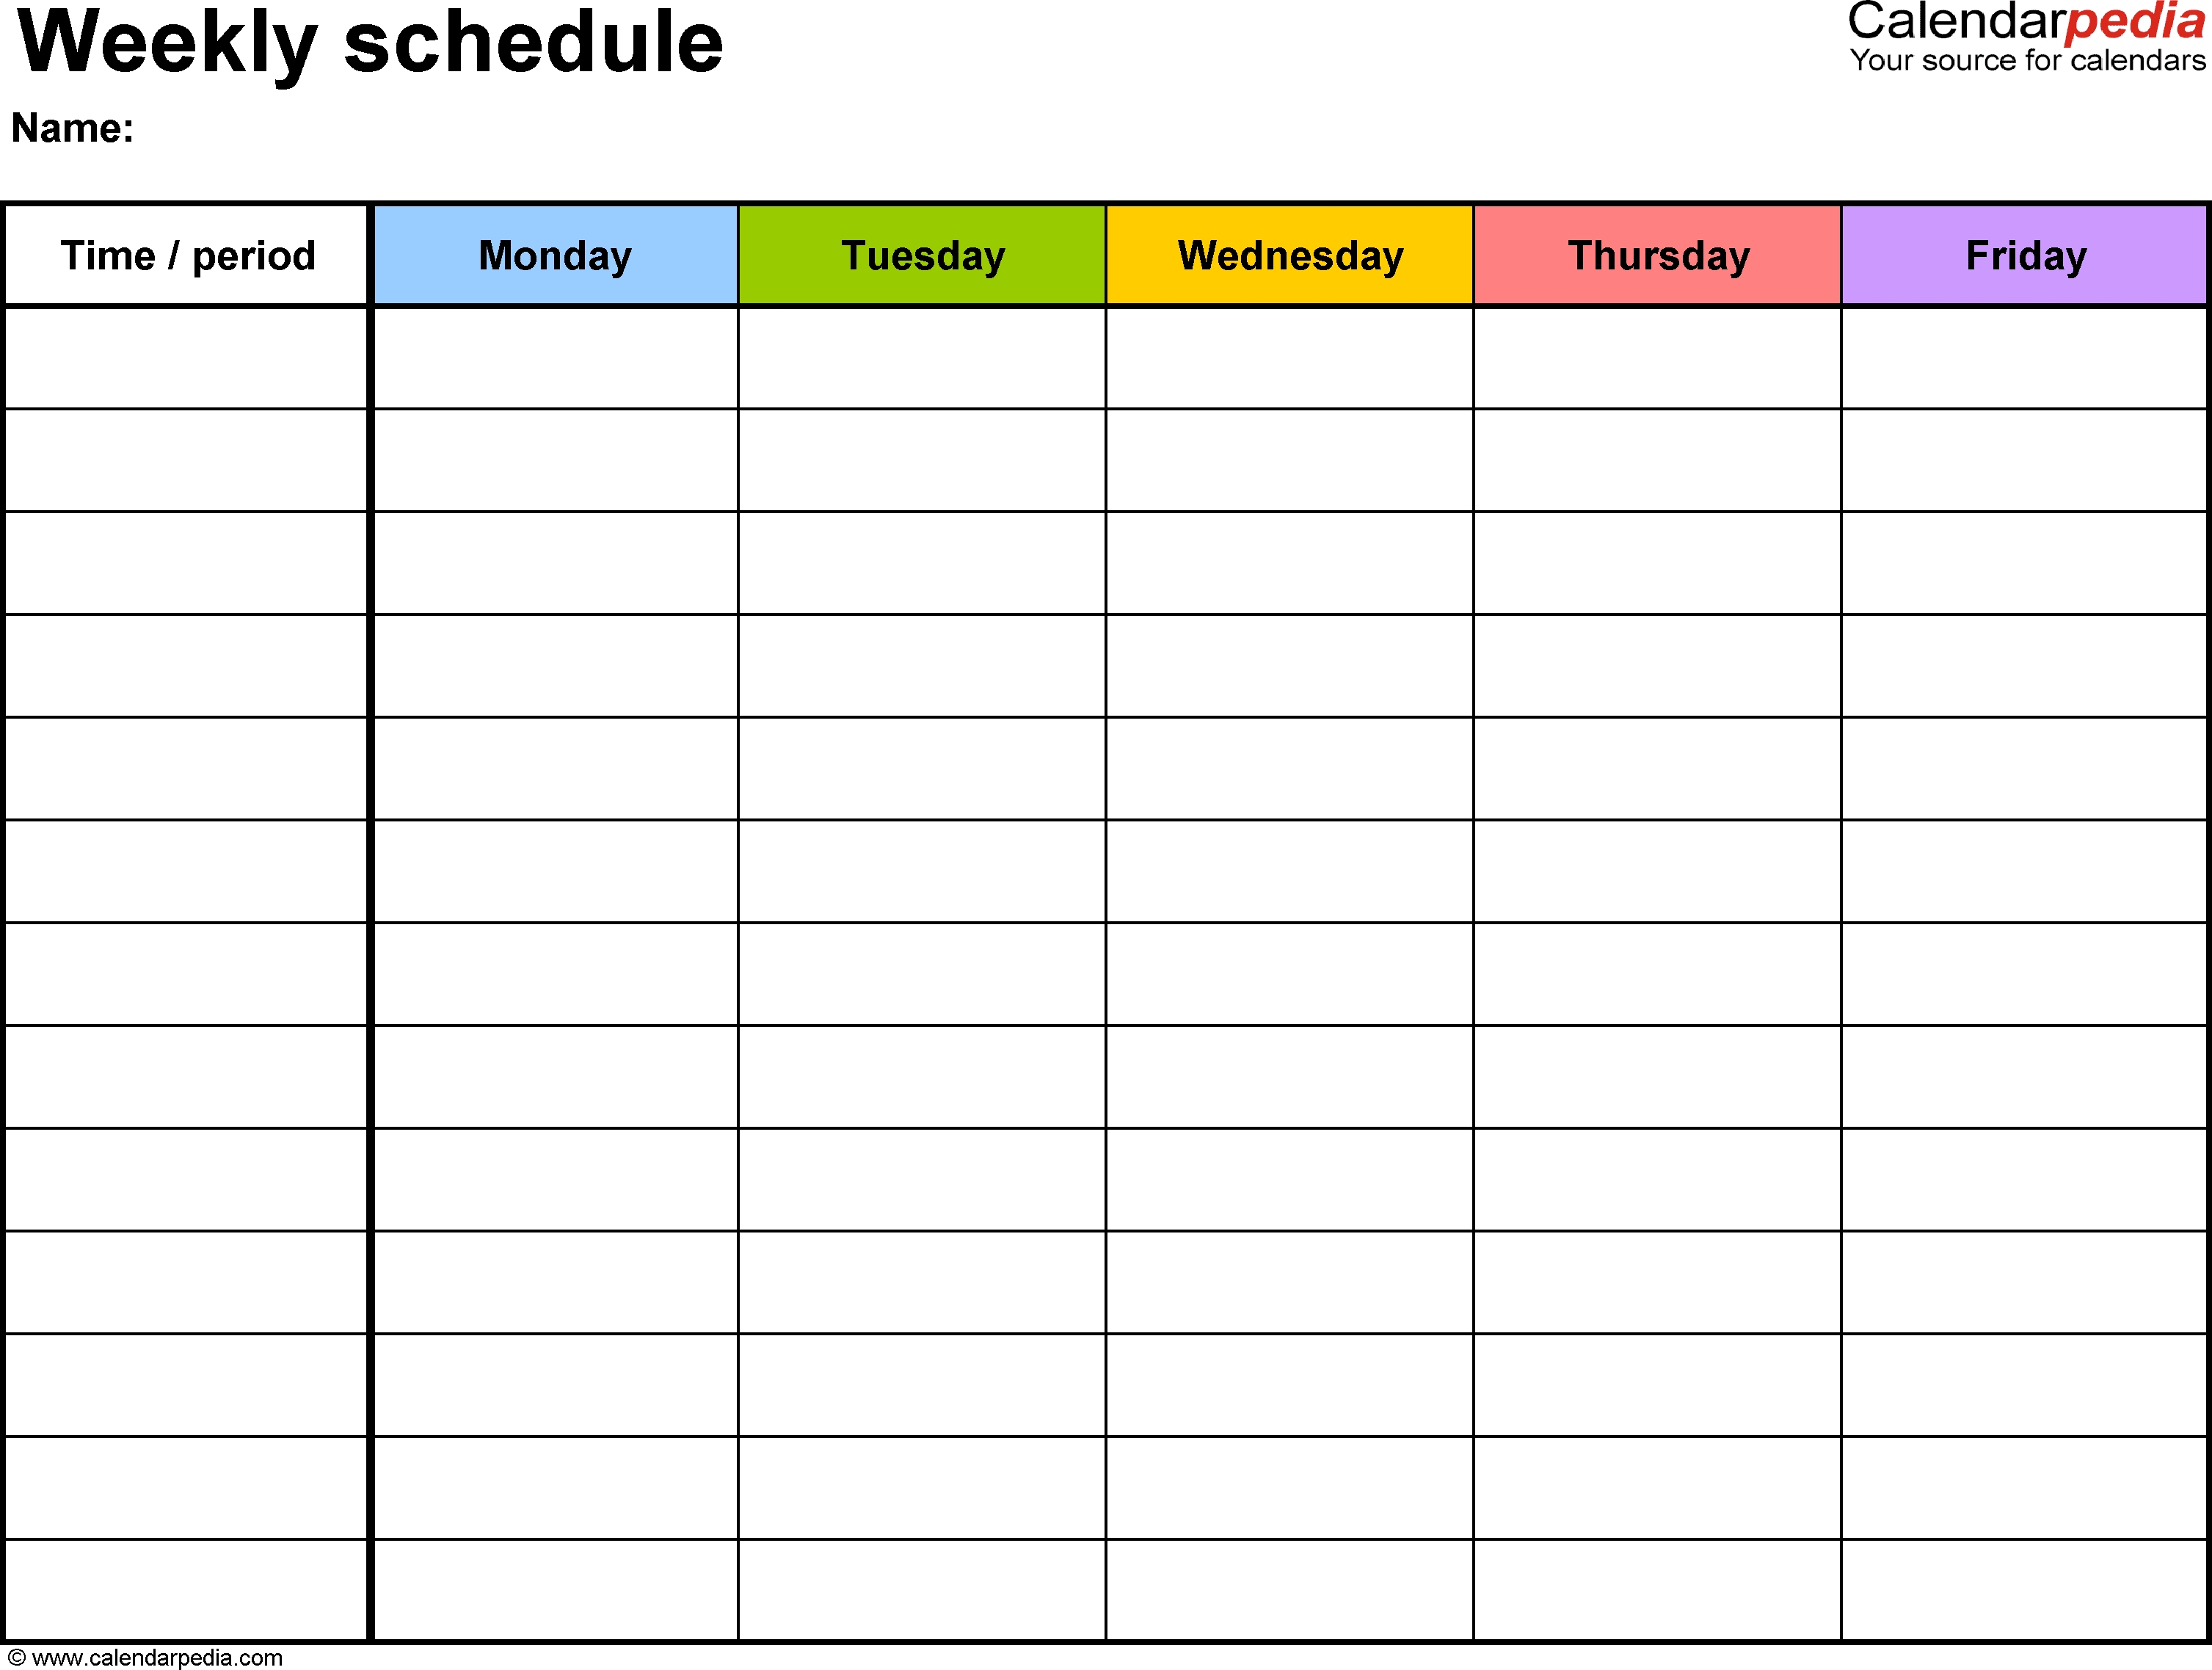 Free Weekly Schedule Templates For Word - 18 Templates  7-Day Week Blank Calendar Template